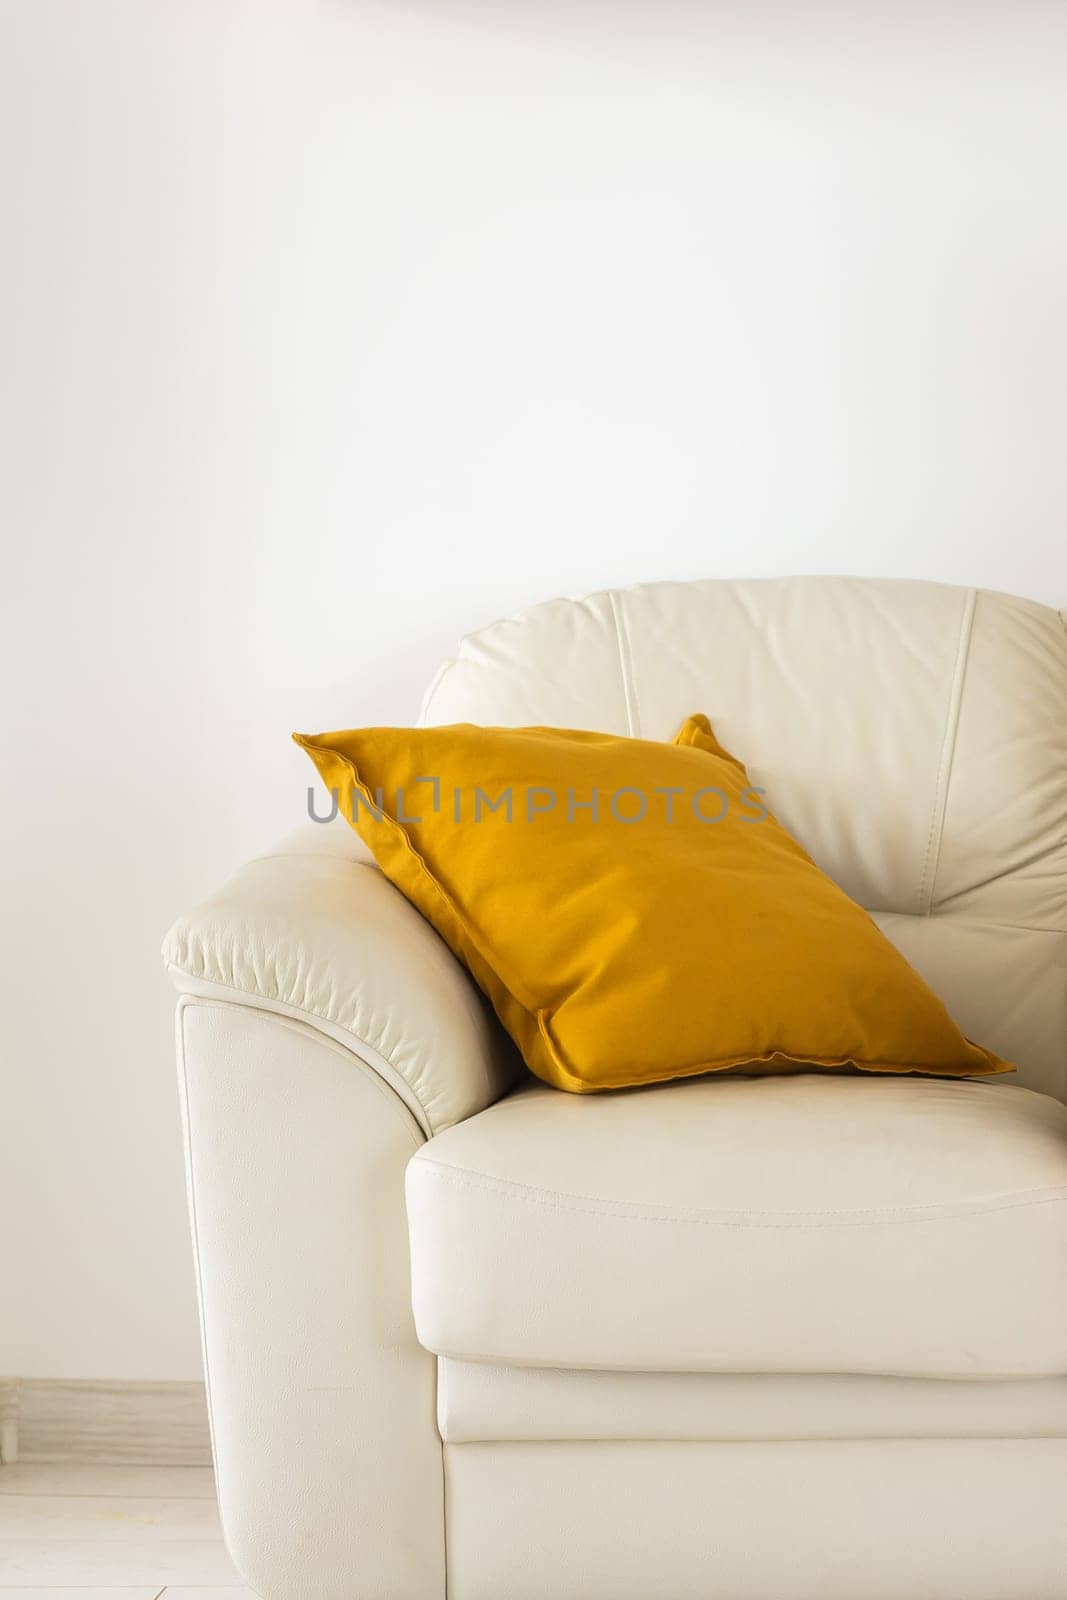 Close up soft yellow pillow on beige sofa - interior detail concept by Satura86